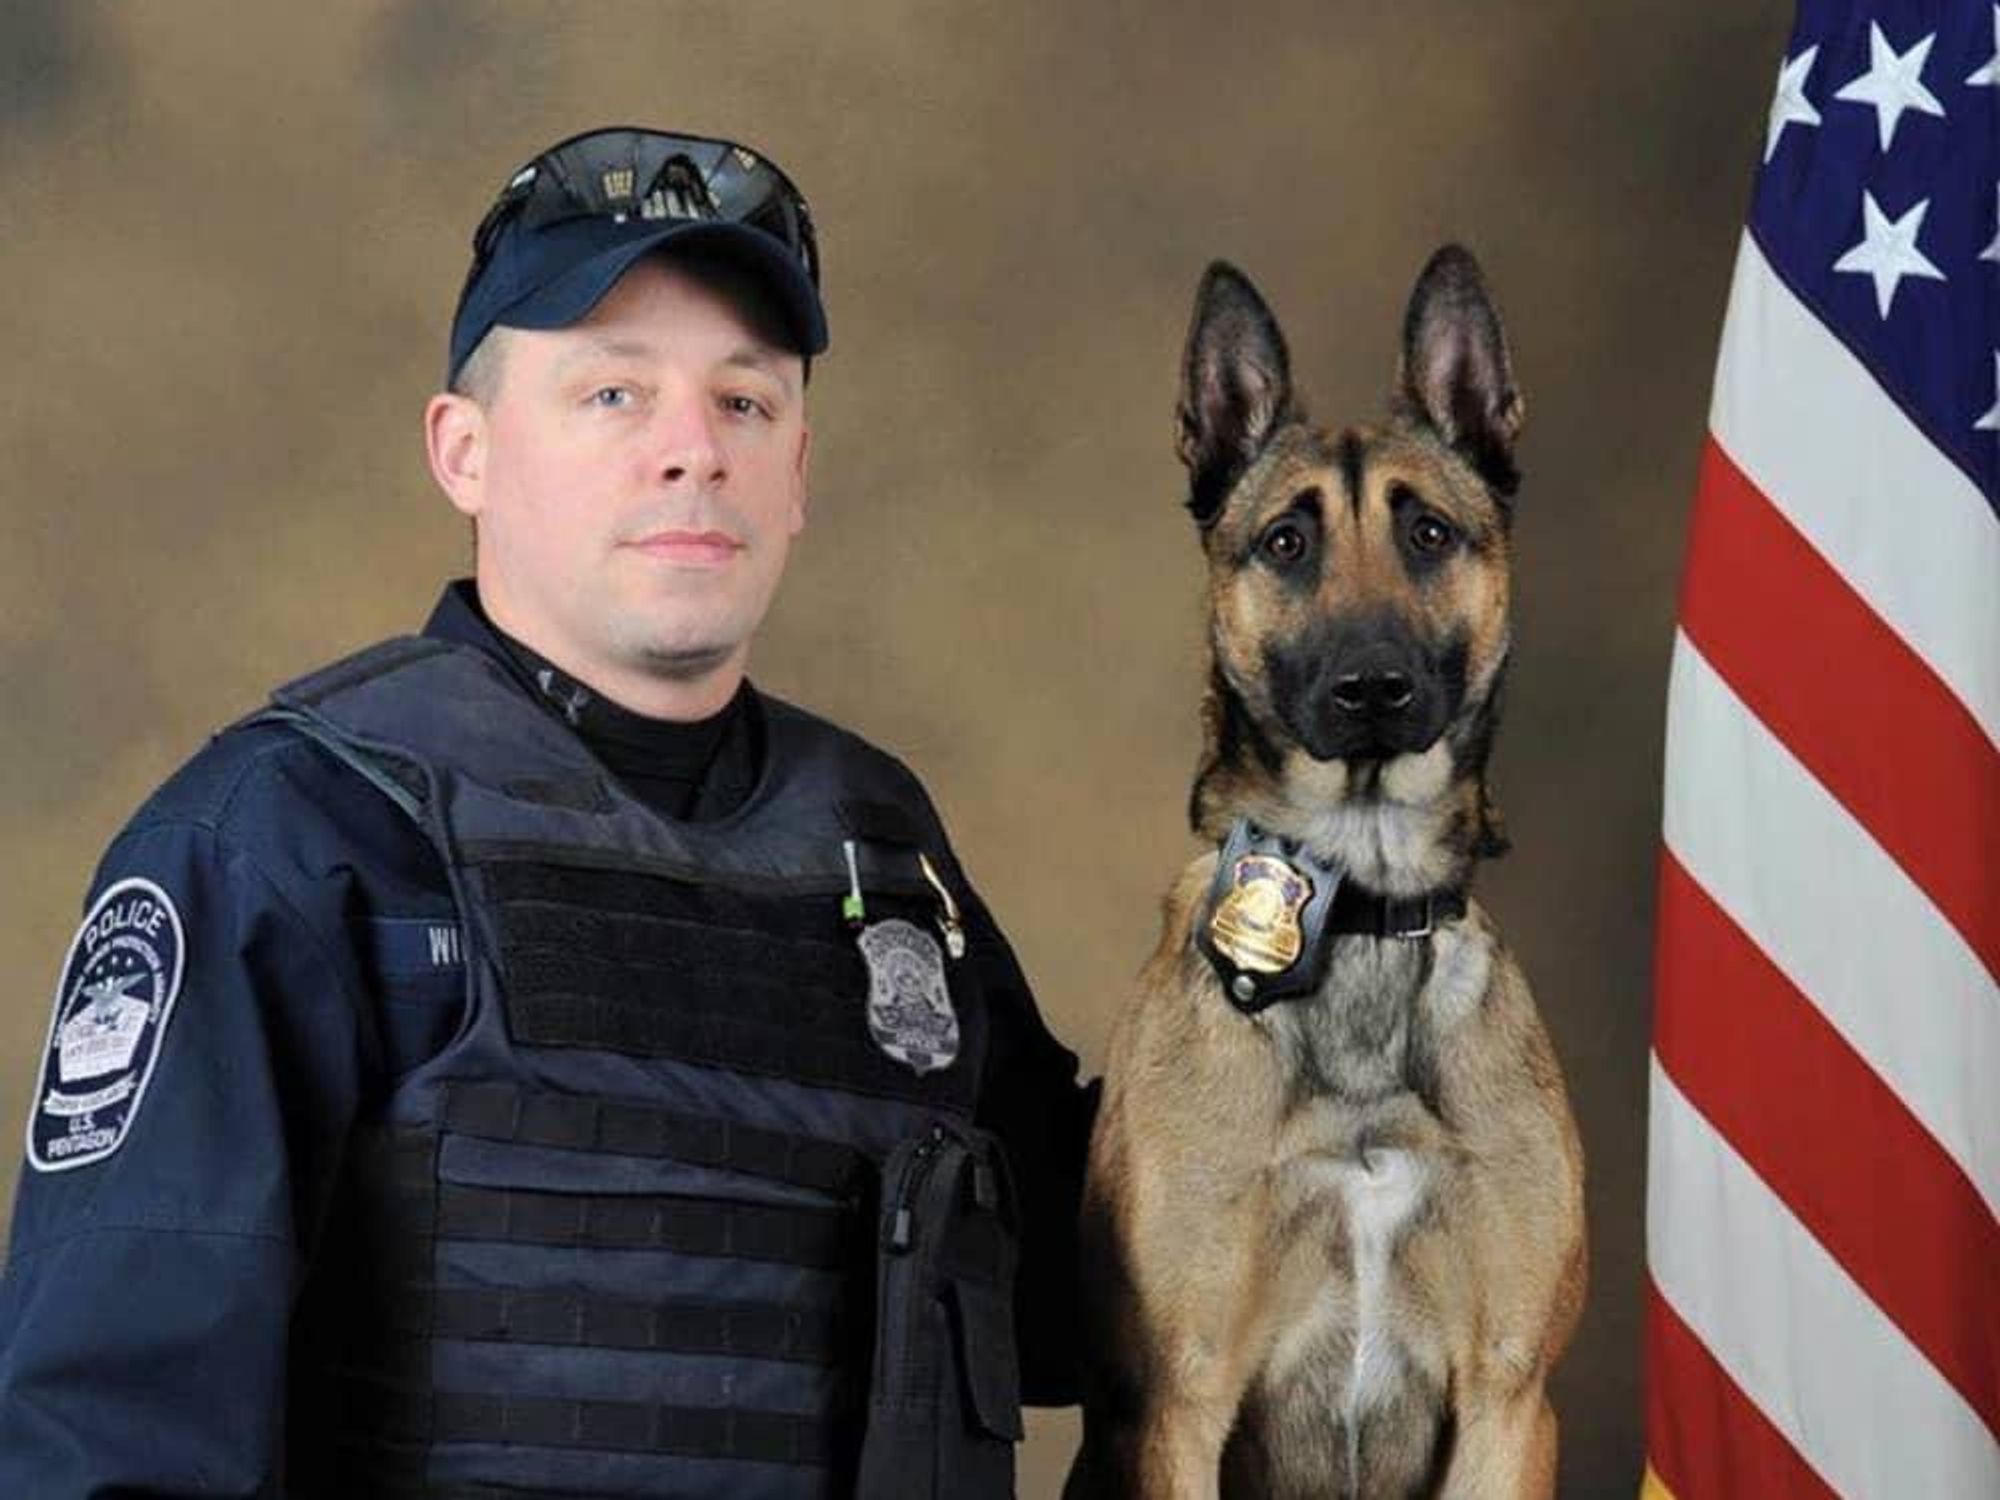 K9s4COPS officer with dog